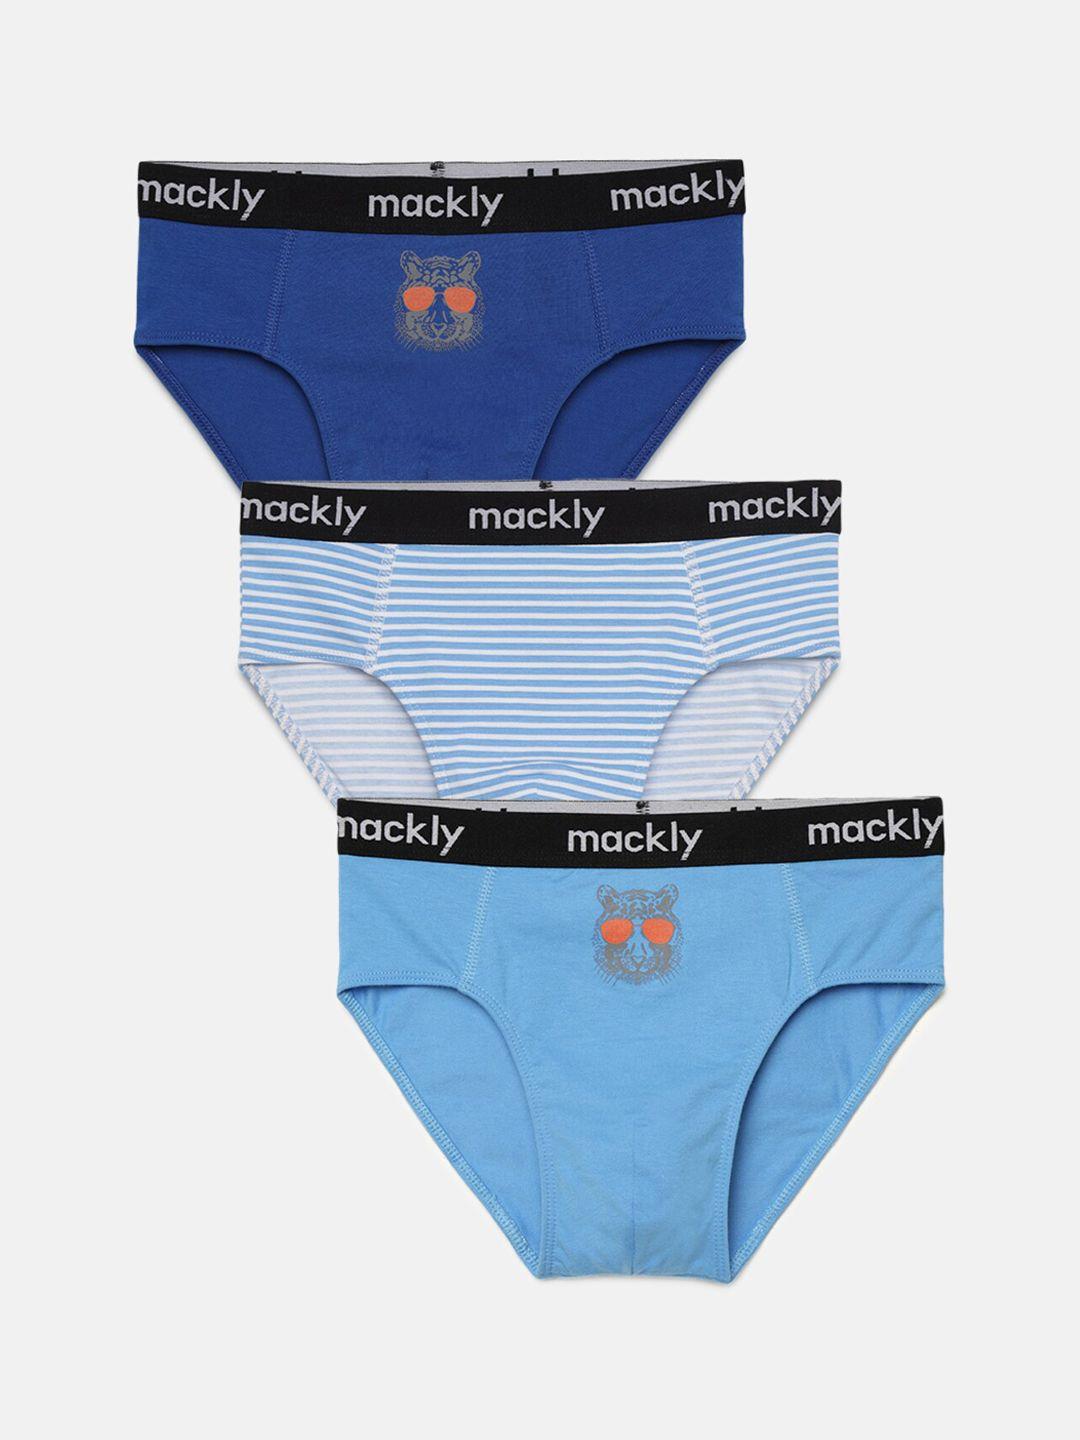 mackly boys pack of 3 mid-rise basic briefs